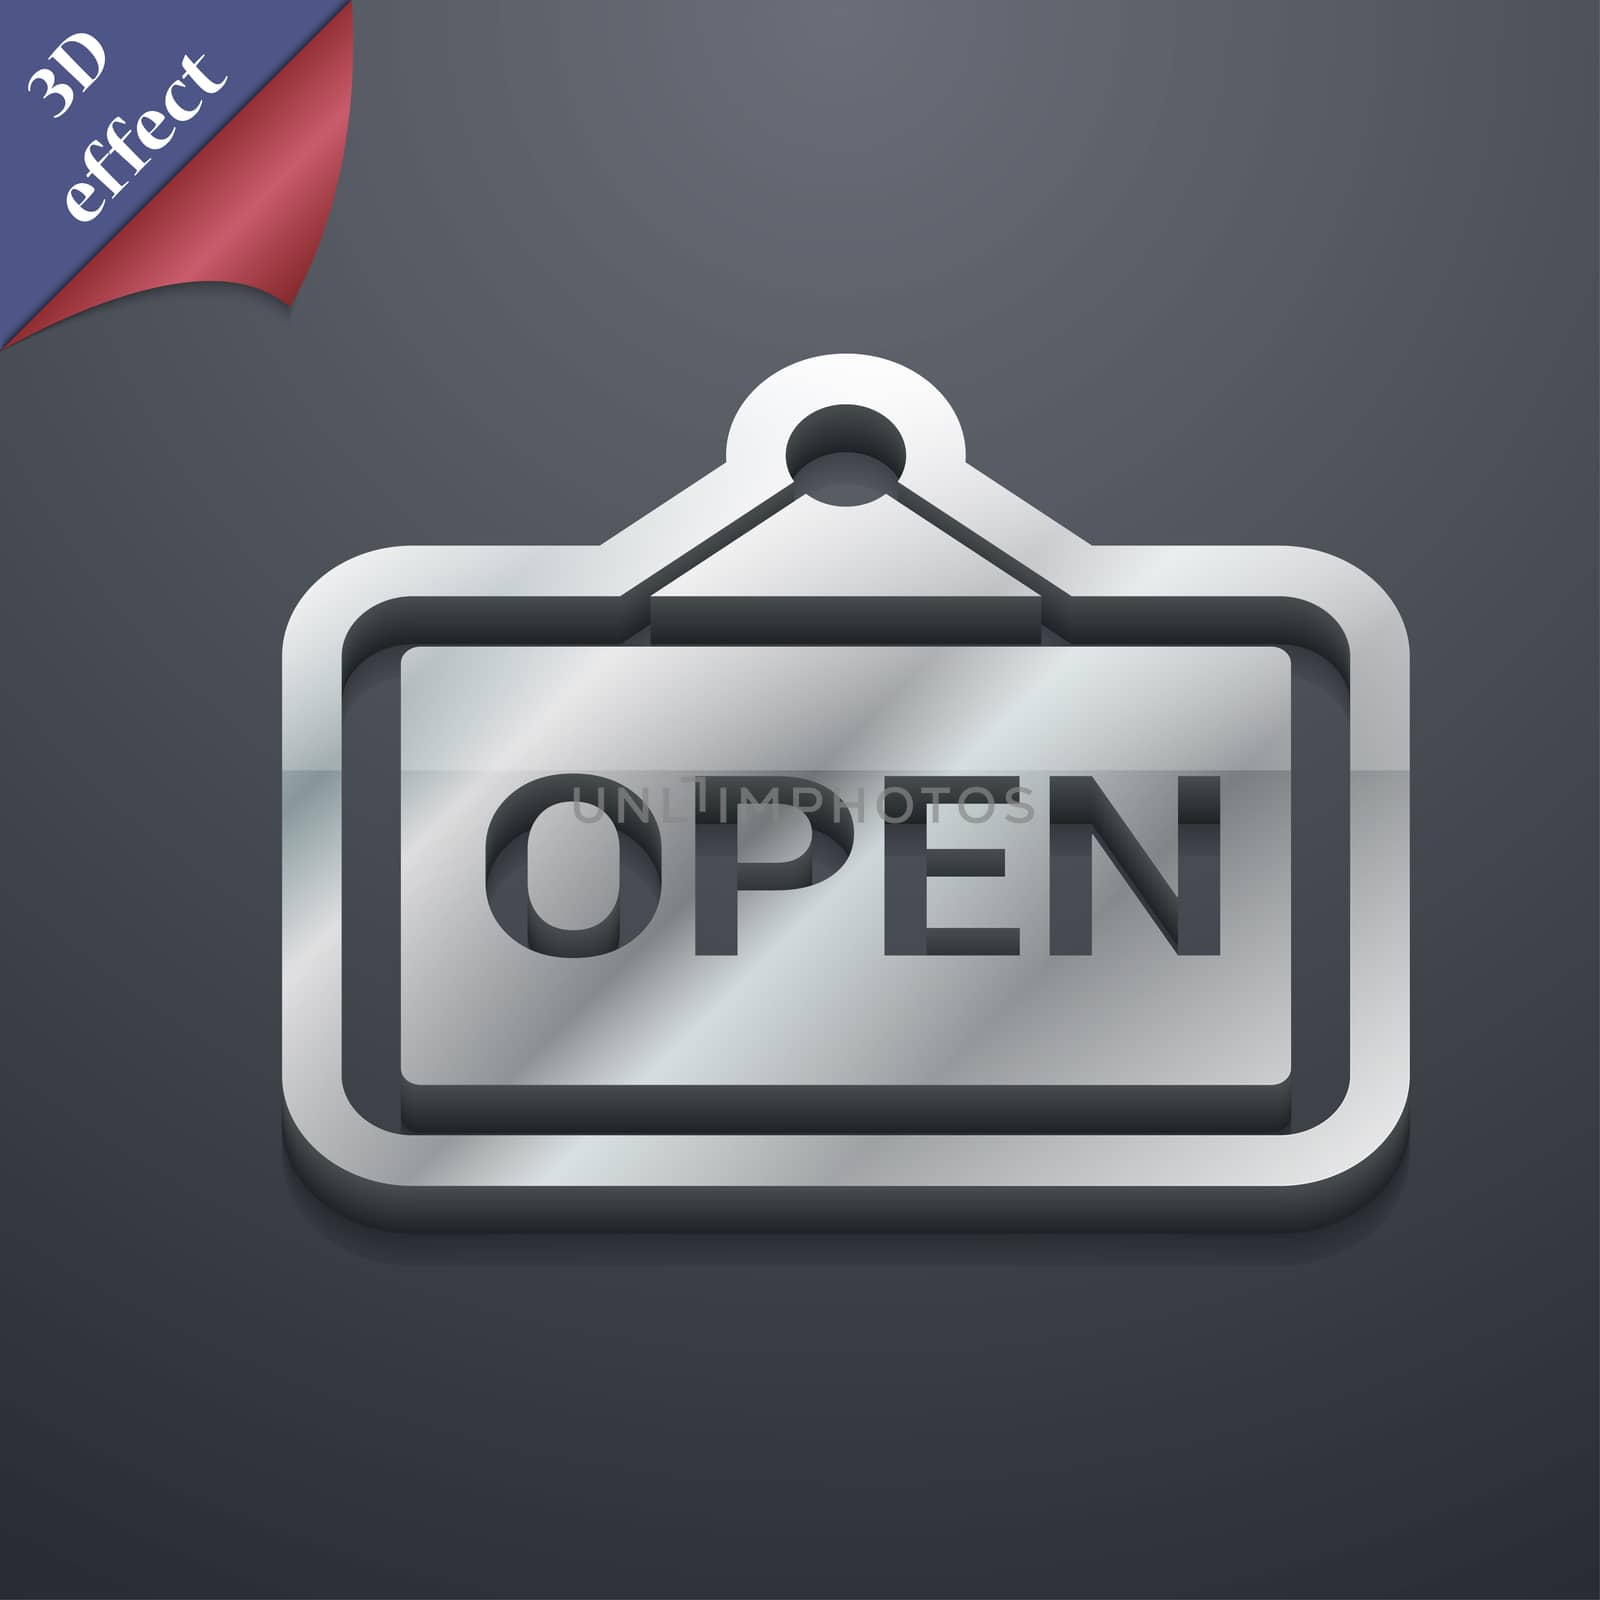 open icon symbol. 3D style. Trendy, modern design with space for your text illustration. Rastrized copy